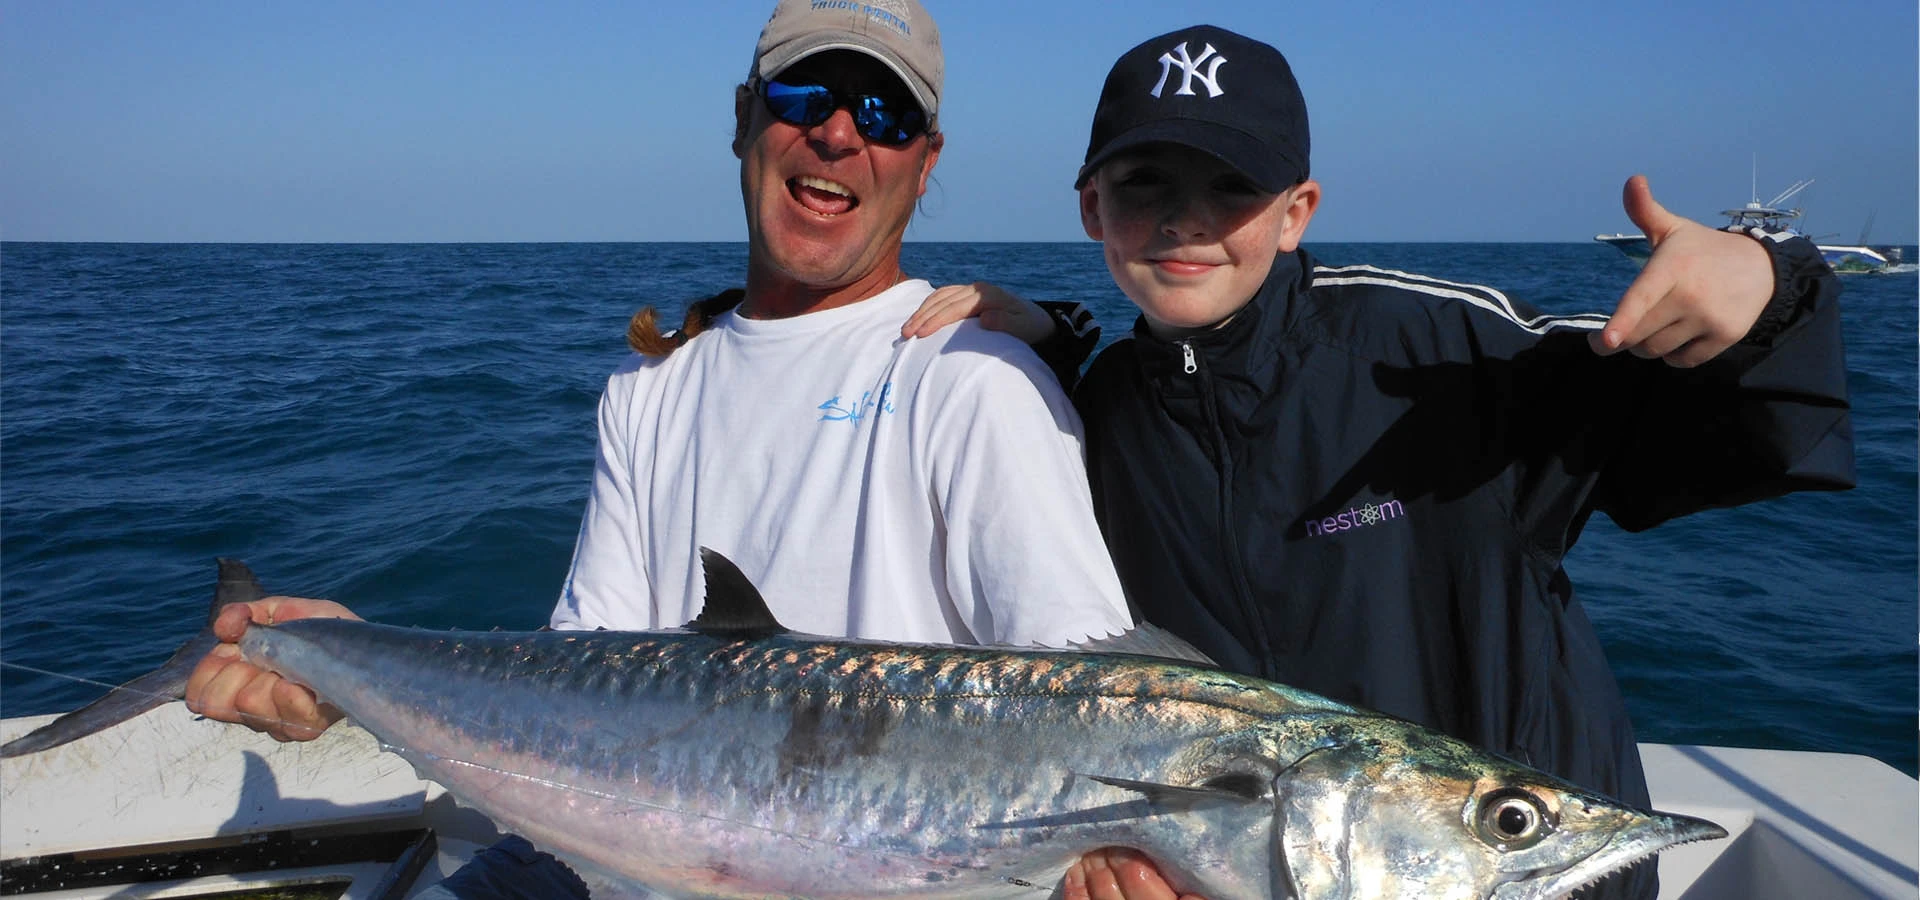 Capt. Dan Barry and young boy with Kingfish.